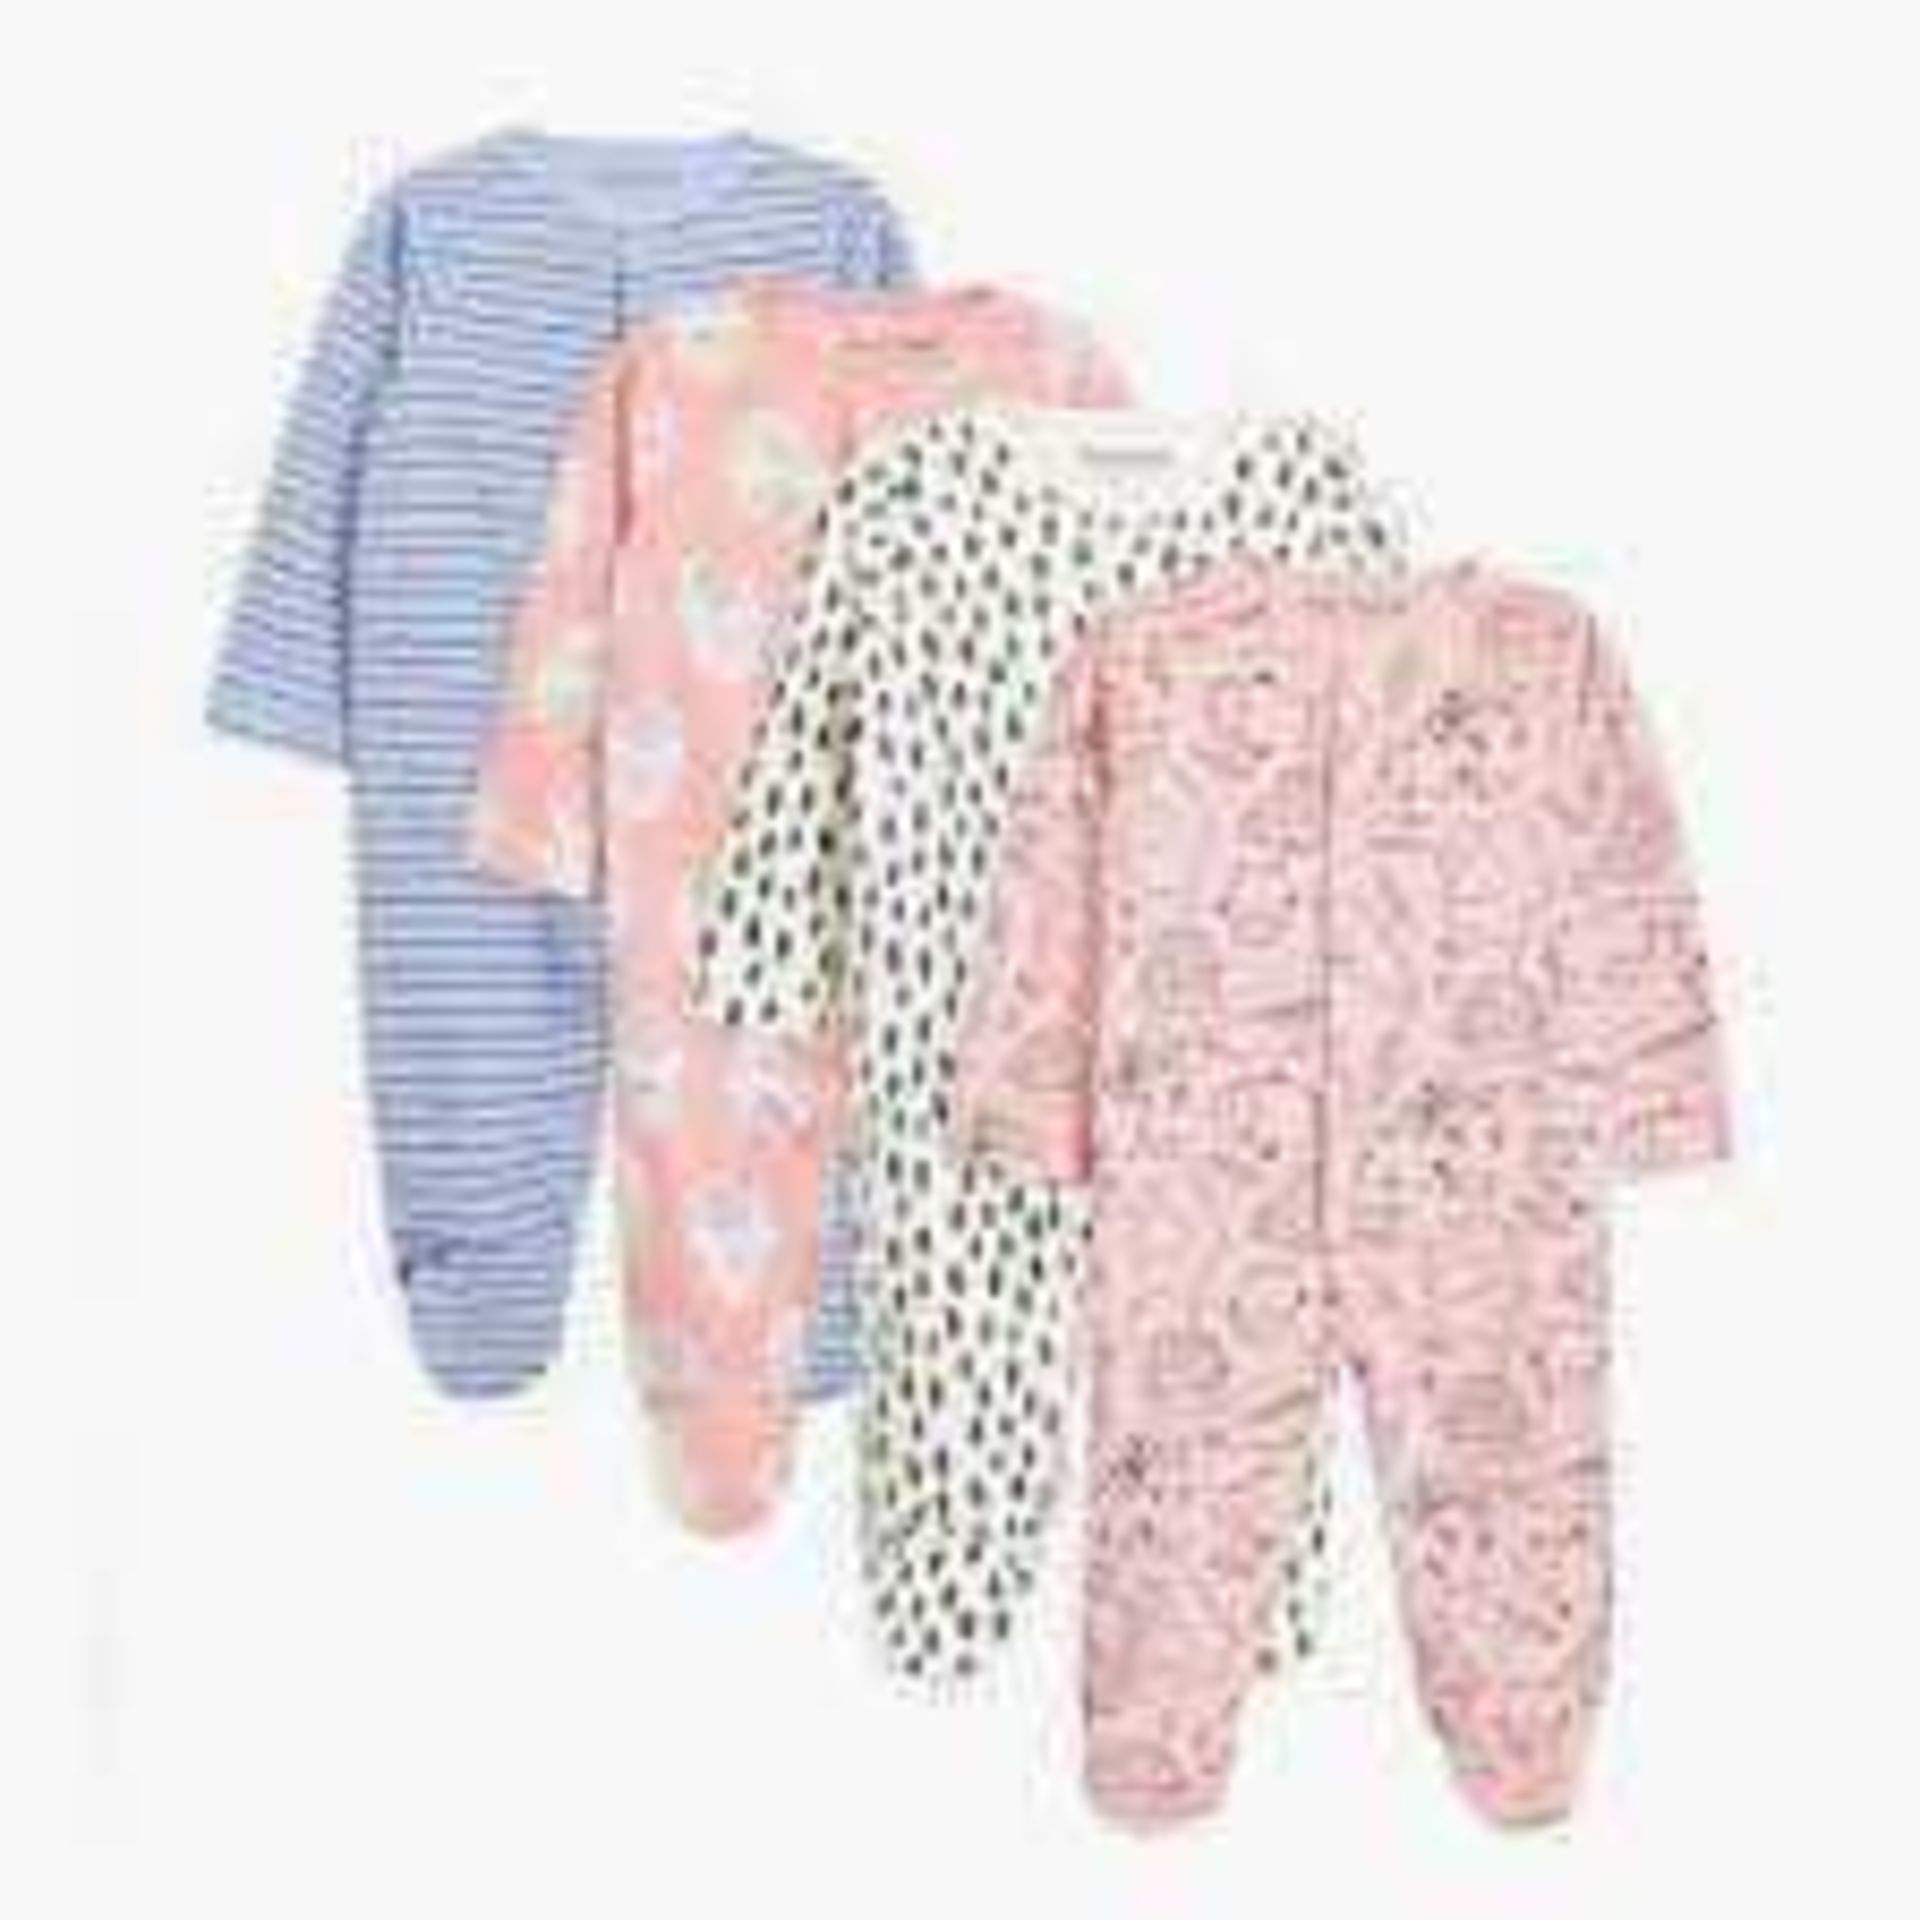 RRP £180 Box To Contain 9 Assorted Brand New John Lewis Baby Clothing Items